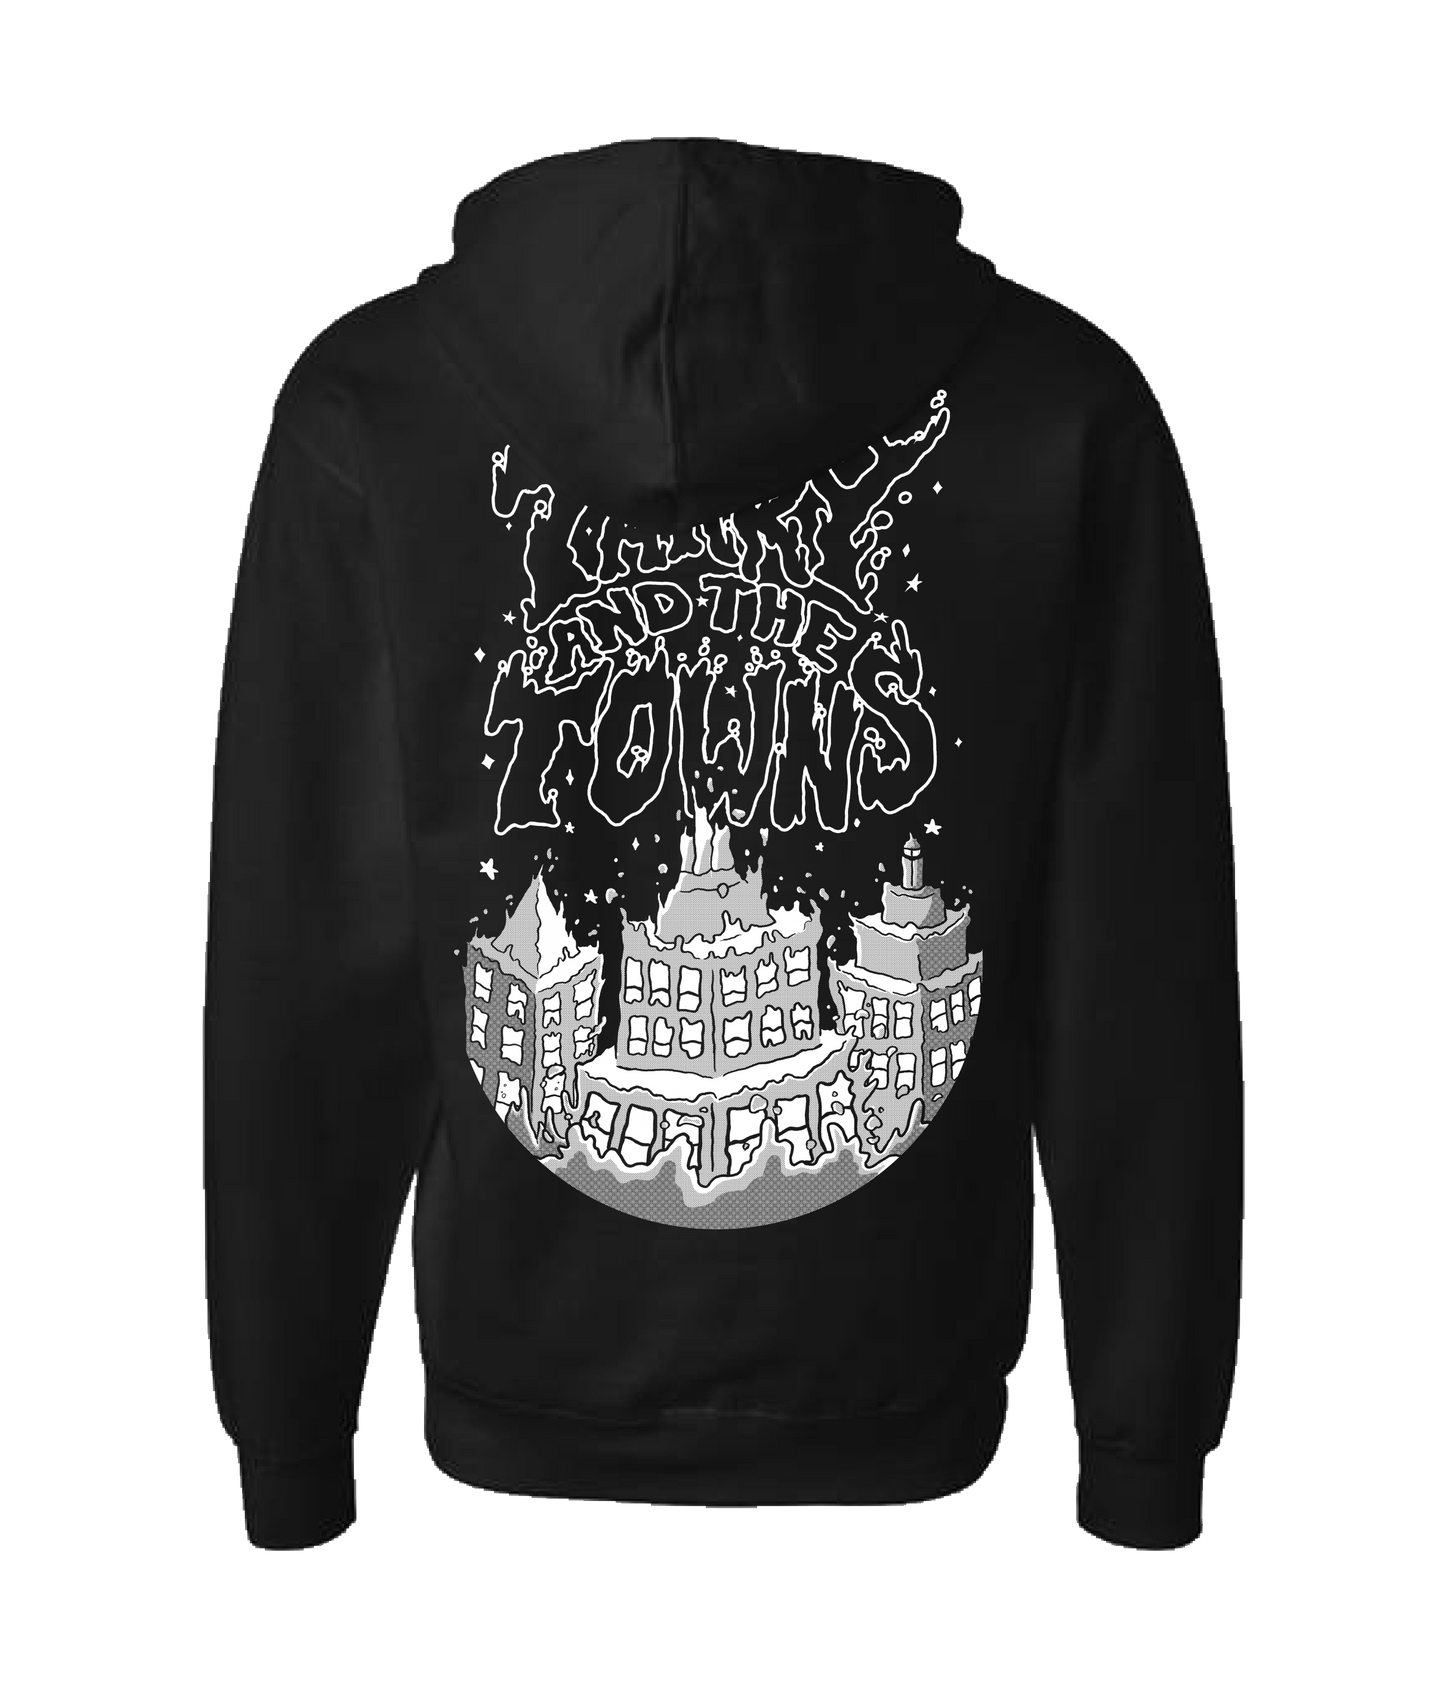 Tarry and the Towns - Inky - Black Zip Up Hoodie